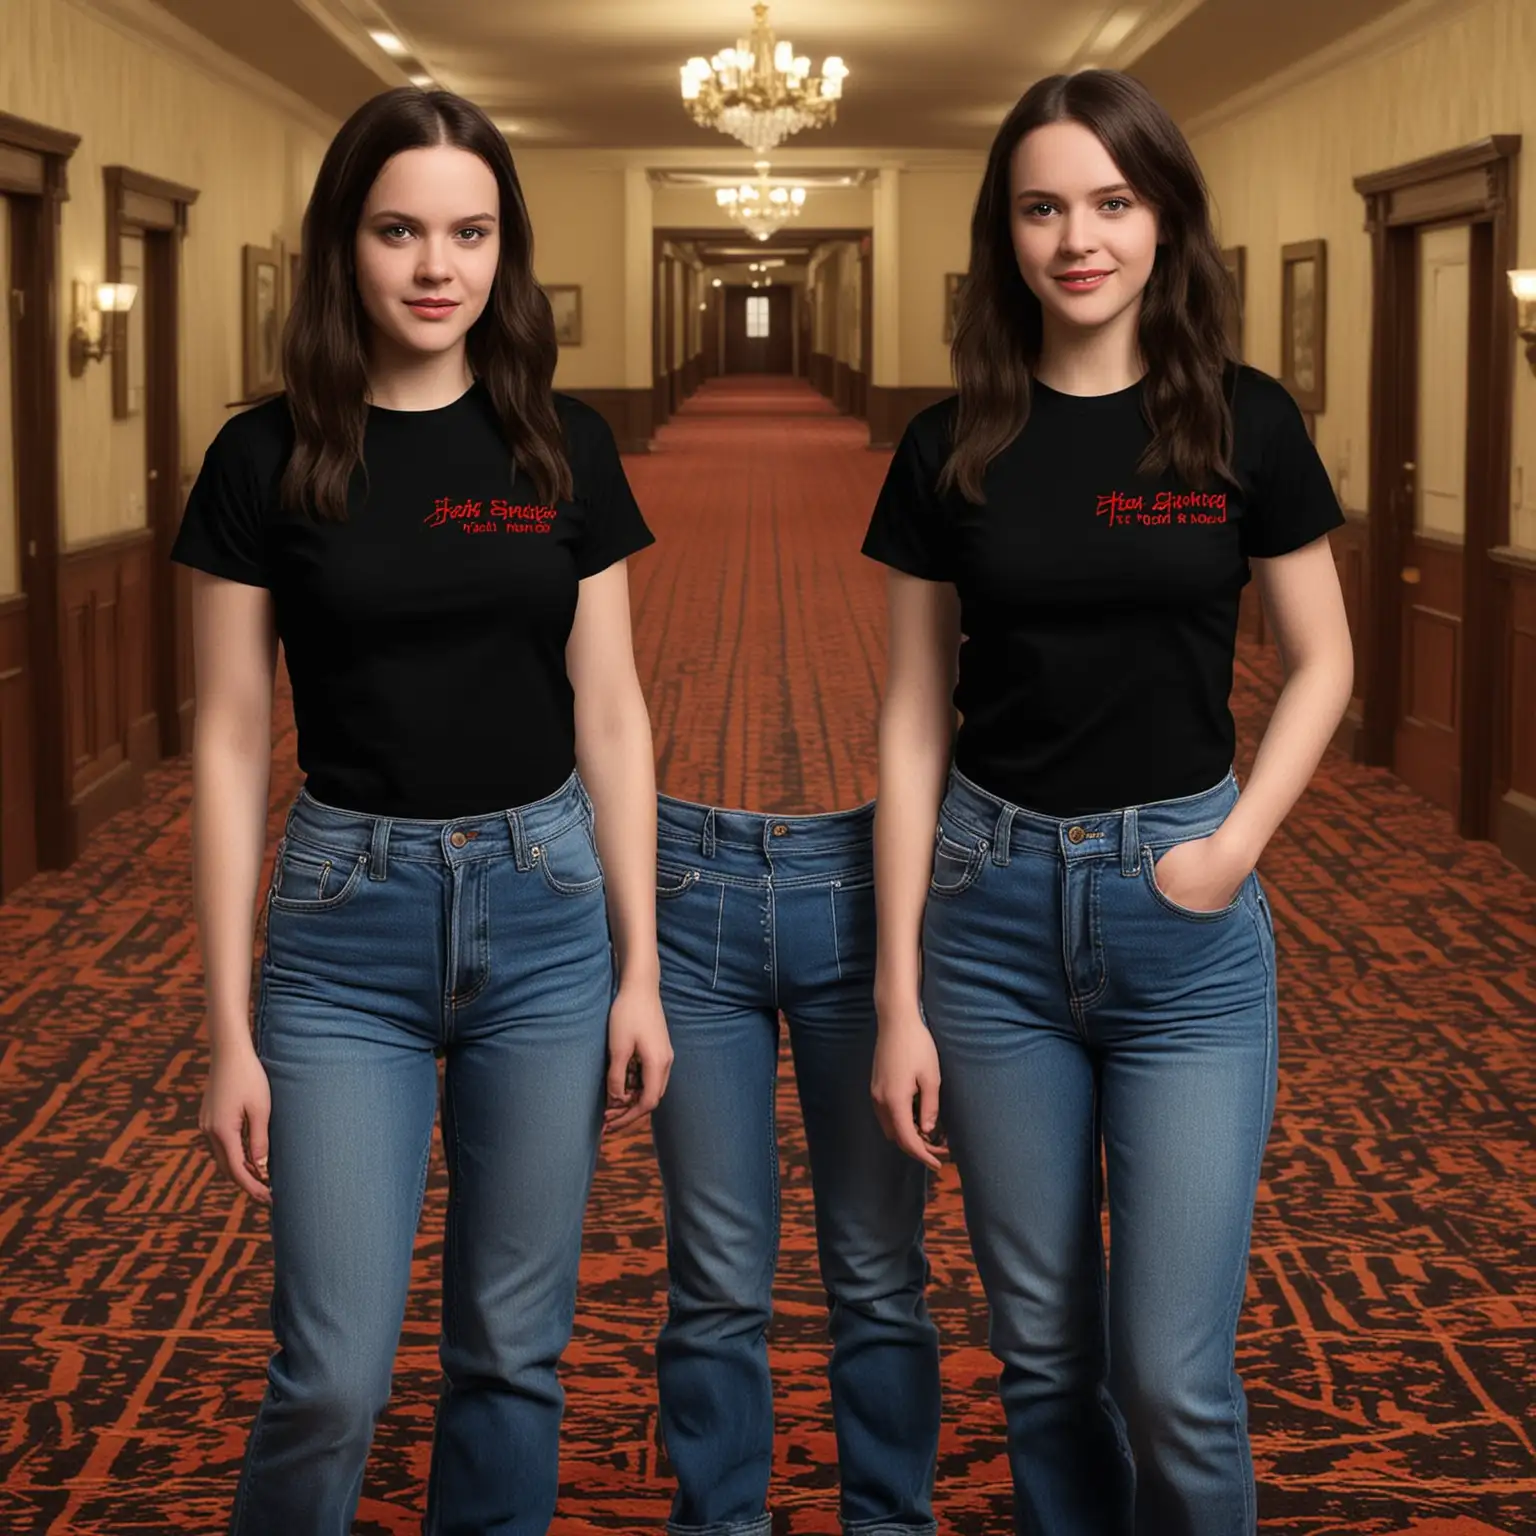 Identical Female Twins in Black Tees at Shining Hotel